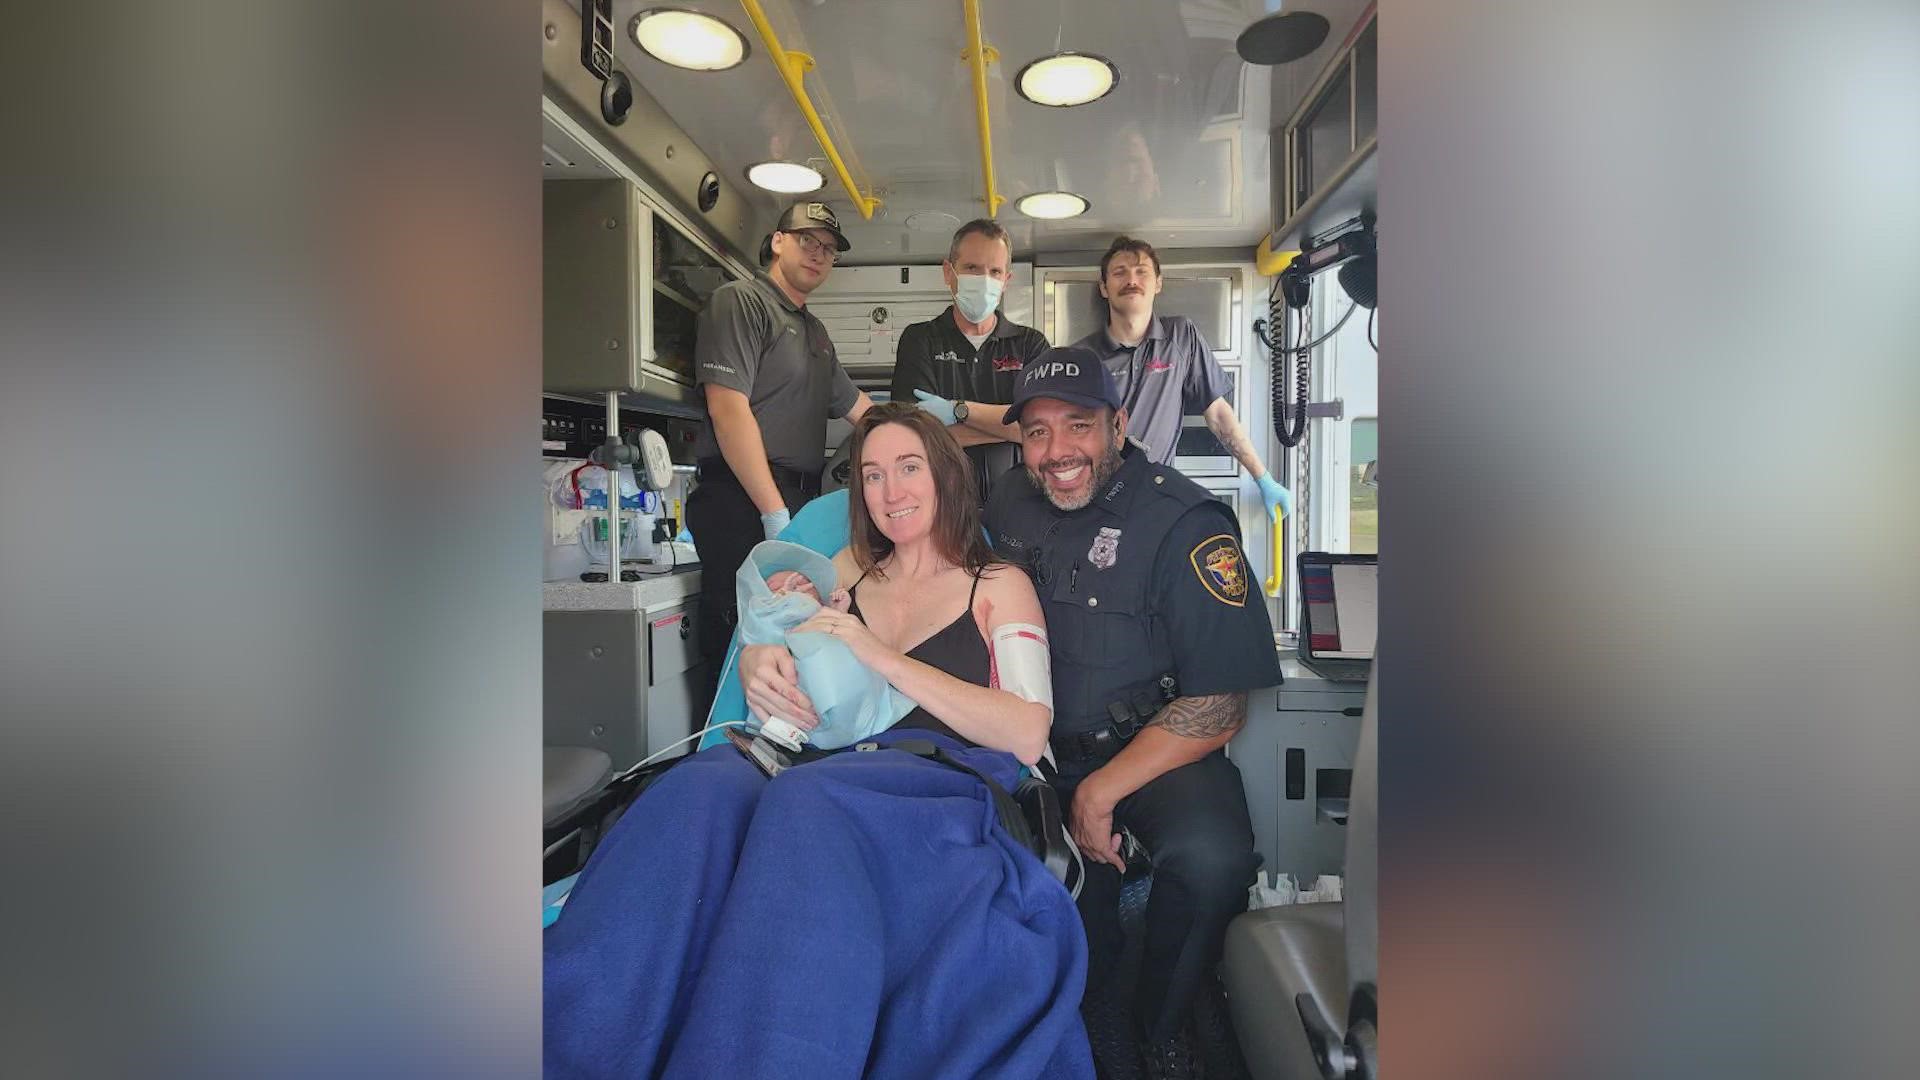 Officer Salazar was at a meeting in the Northwest Police Station when he heard the woman screaming. When he got to her vehicle, he realized she was in active labor.